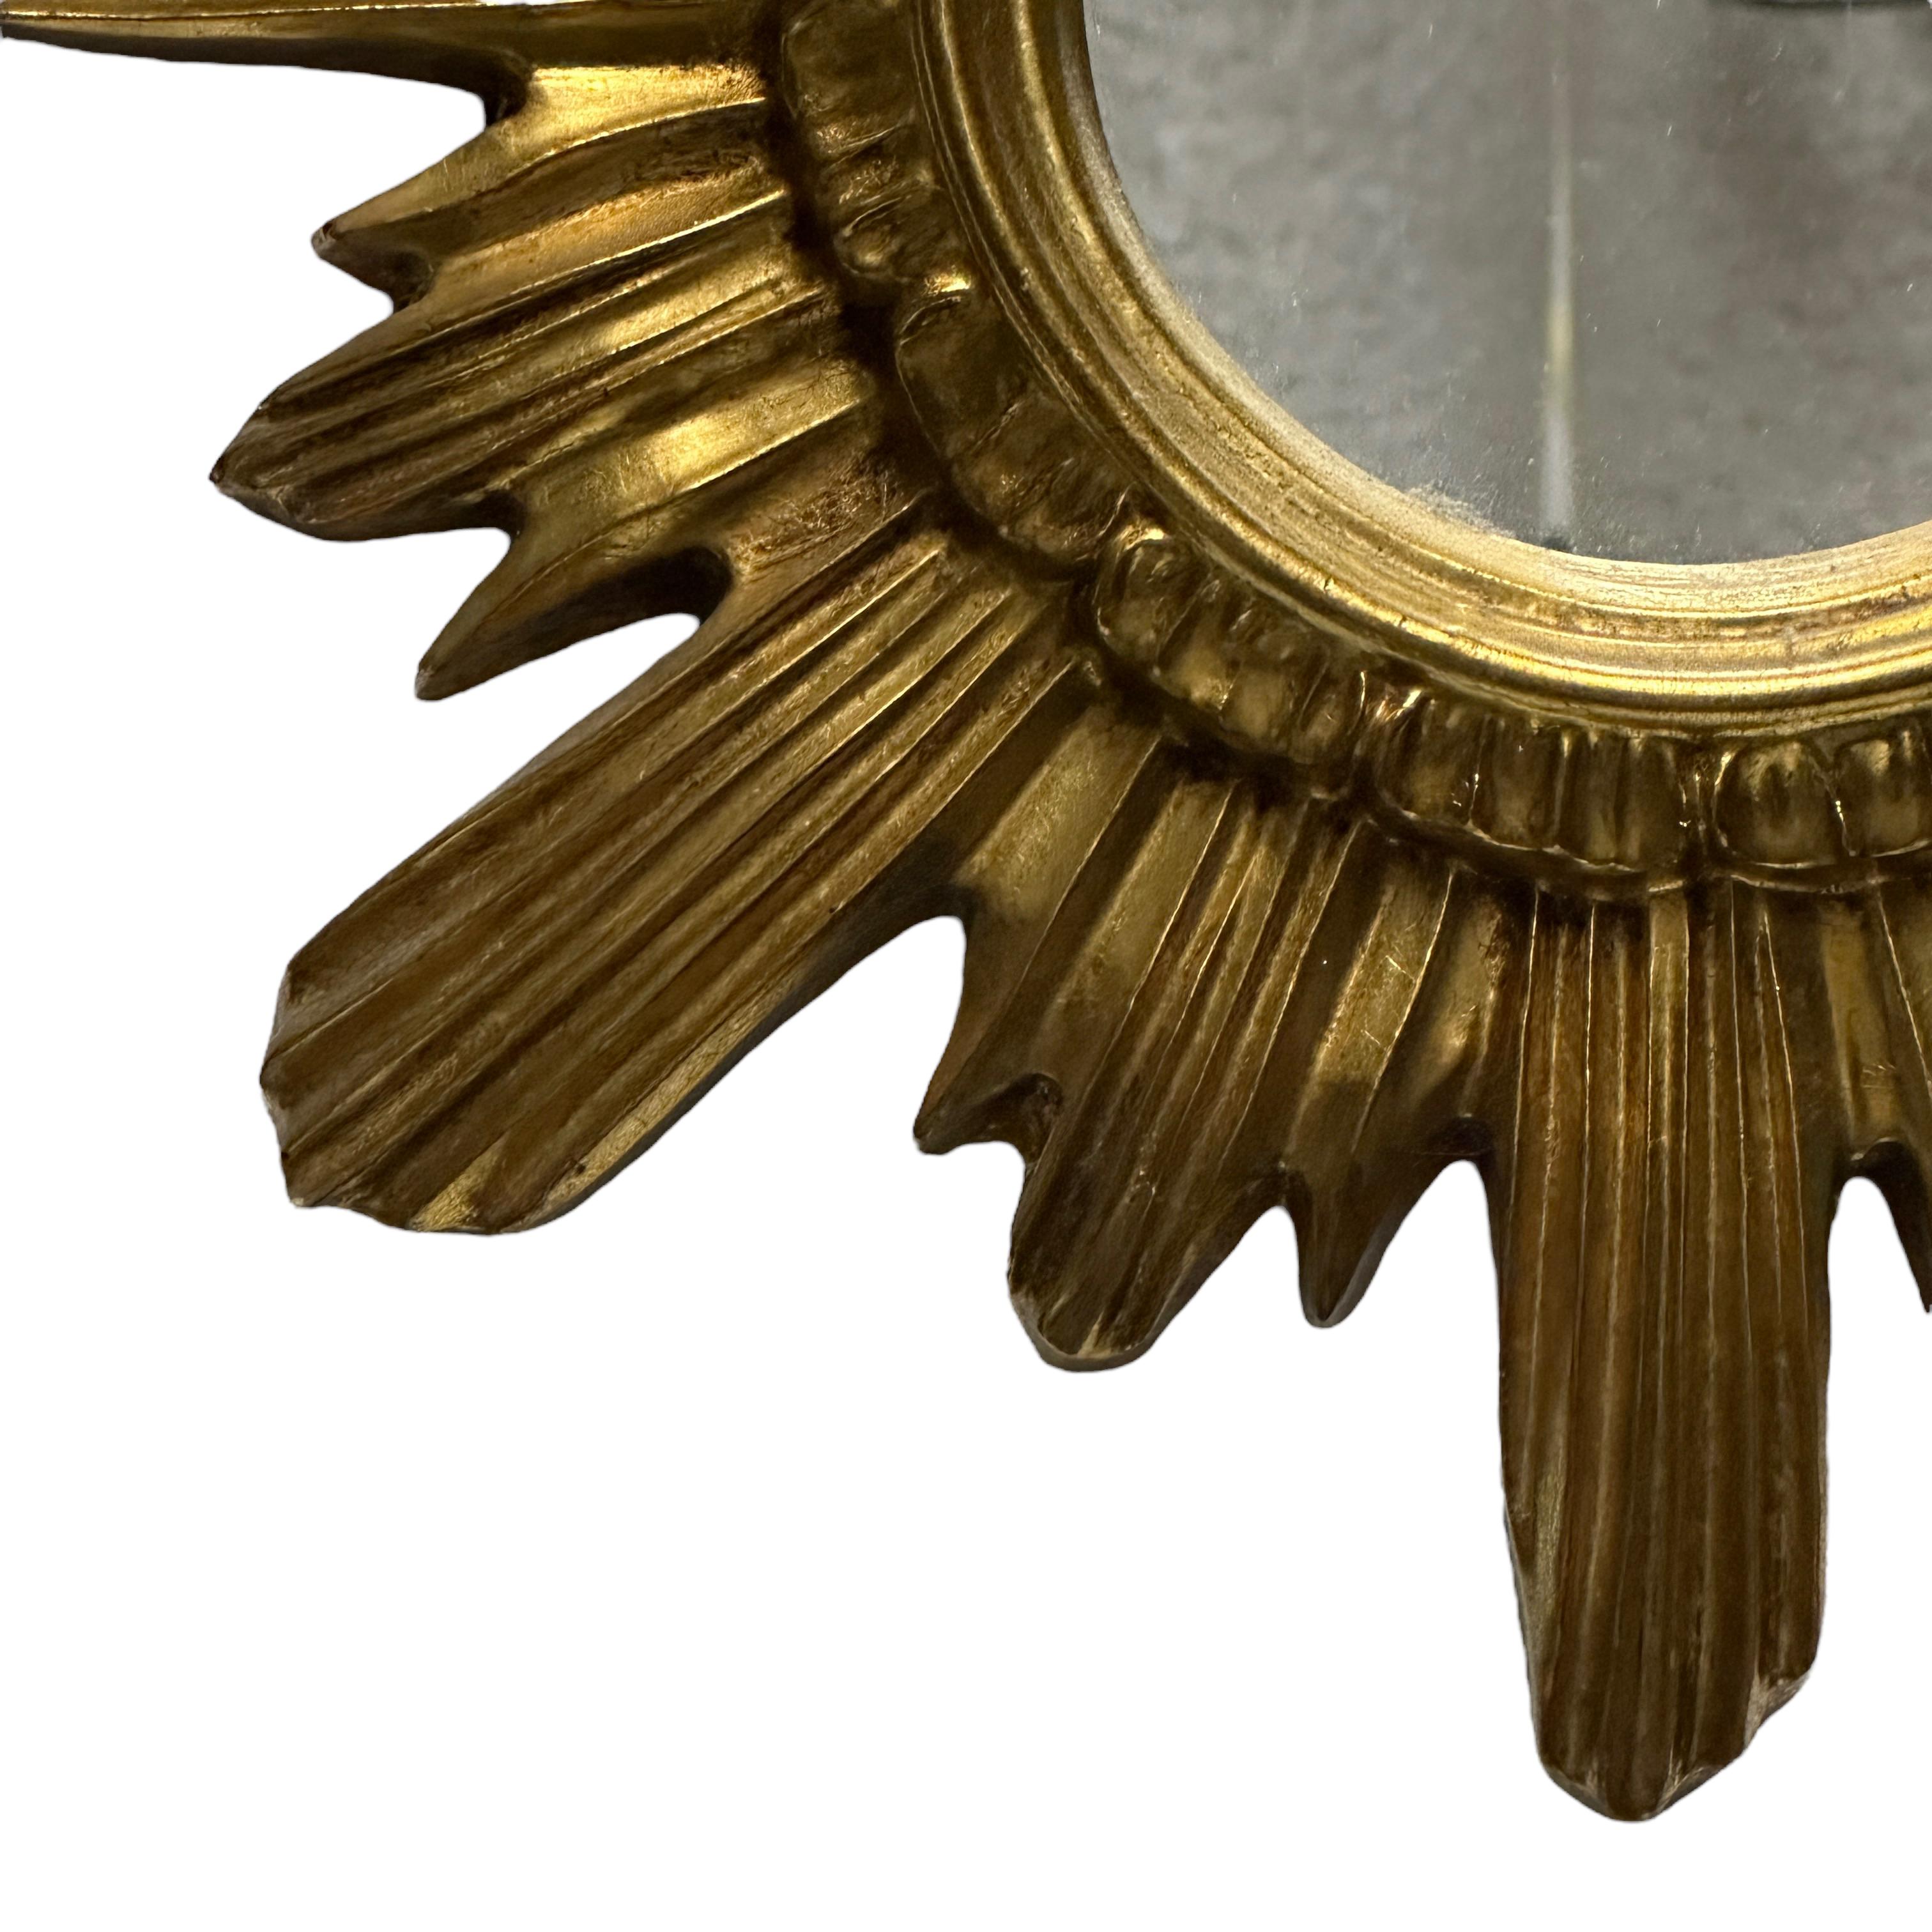 A gorgeous starburst mirror. Made of gilded wood and stucco. No chips, no cracks, no repairs. It measures 16.5